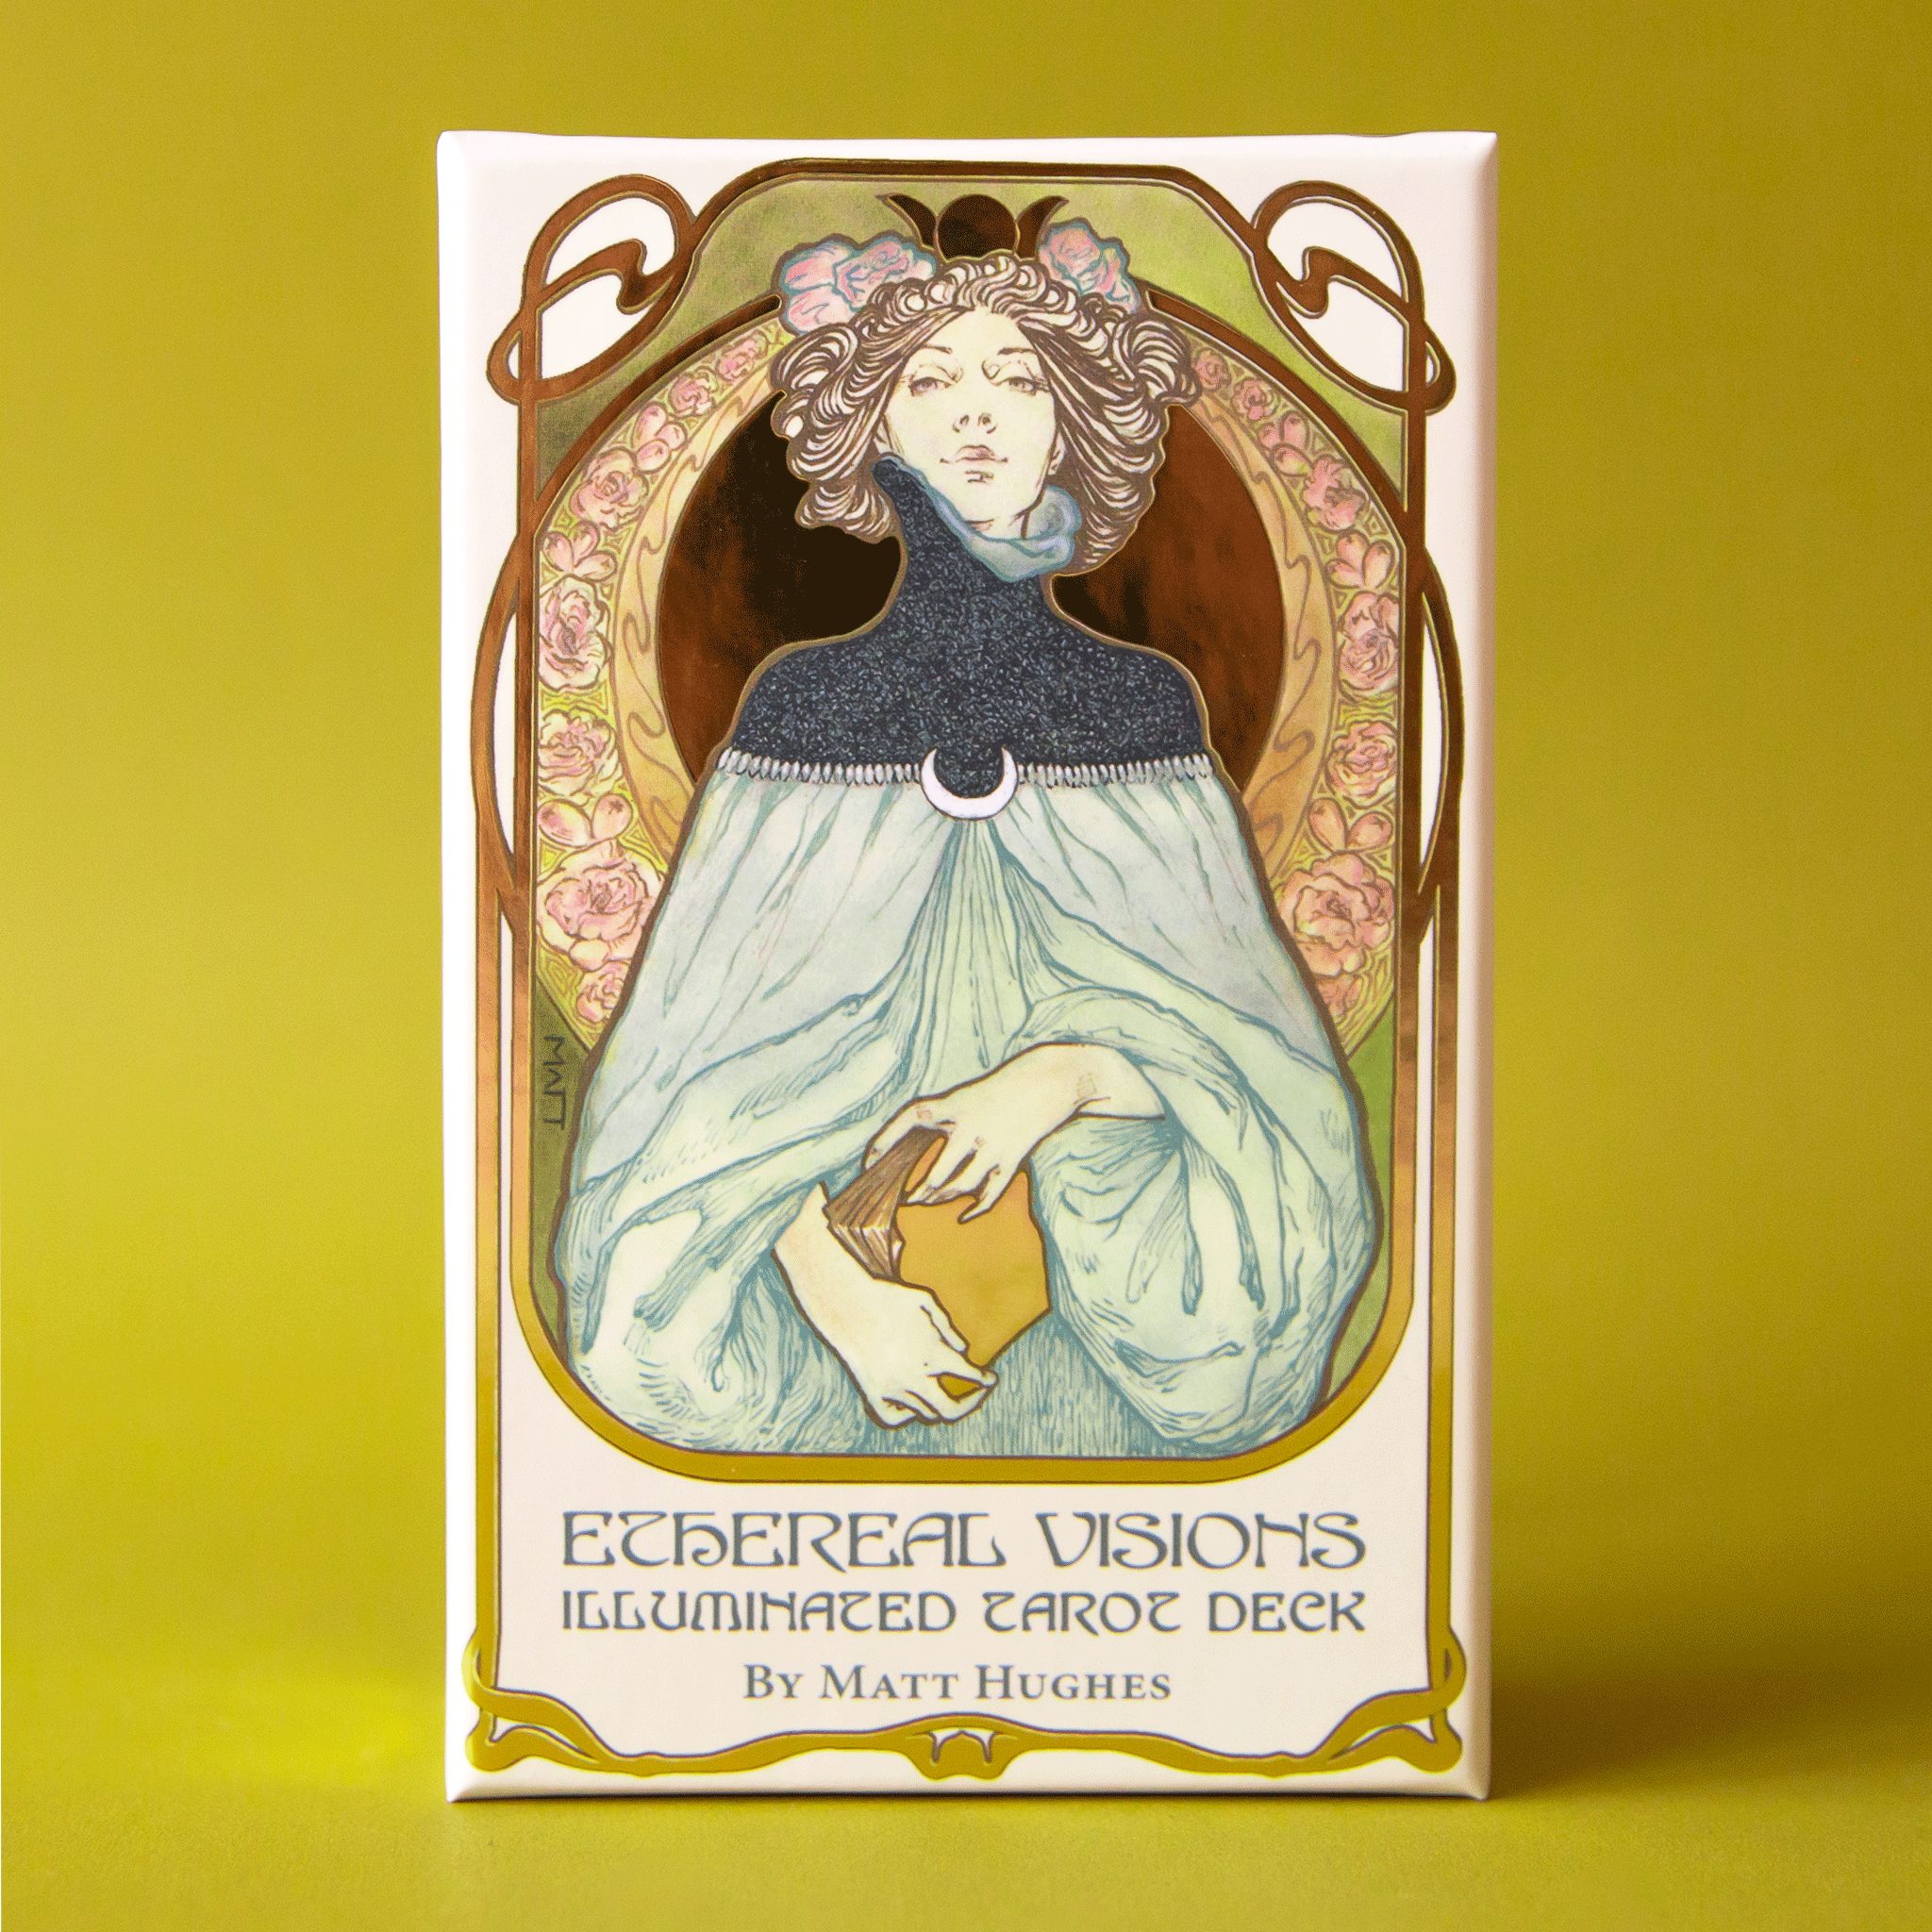 On a green background is a deck of cards with a person illustrated on the front holding a book and text underneath that reads, "Ethereal Visions Illuminated Tarot Deck". 